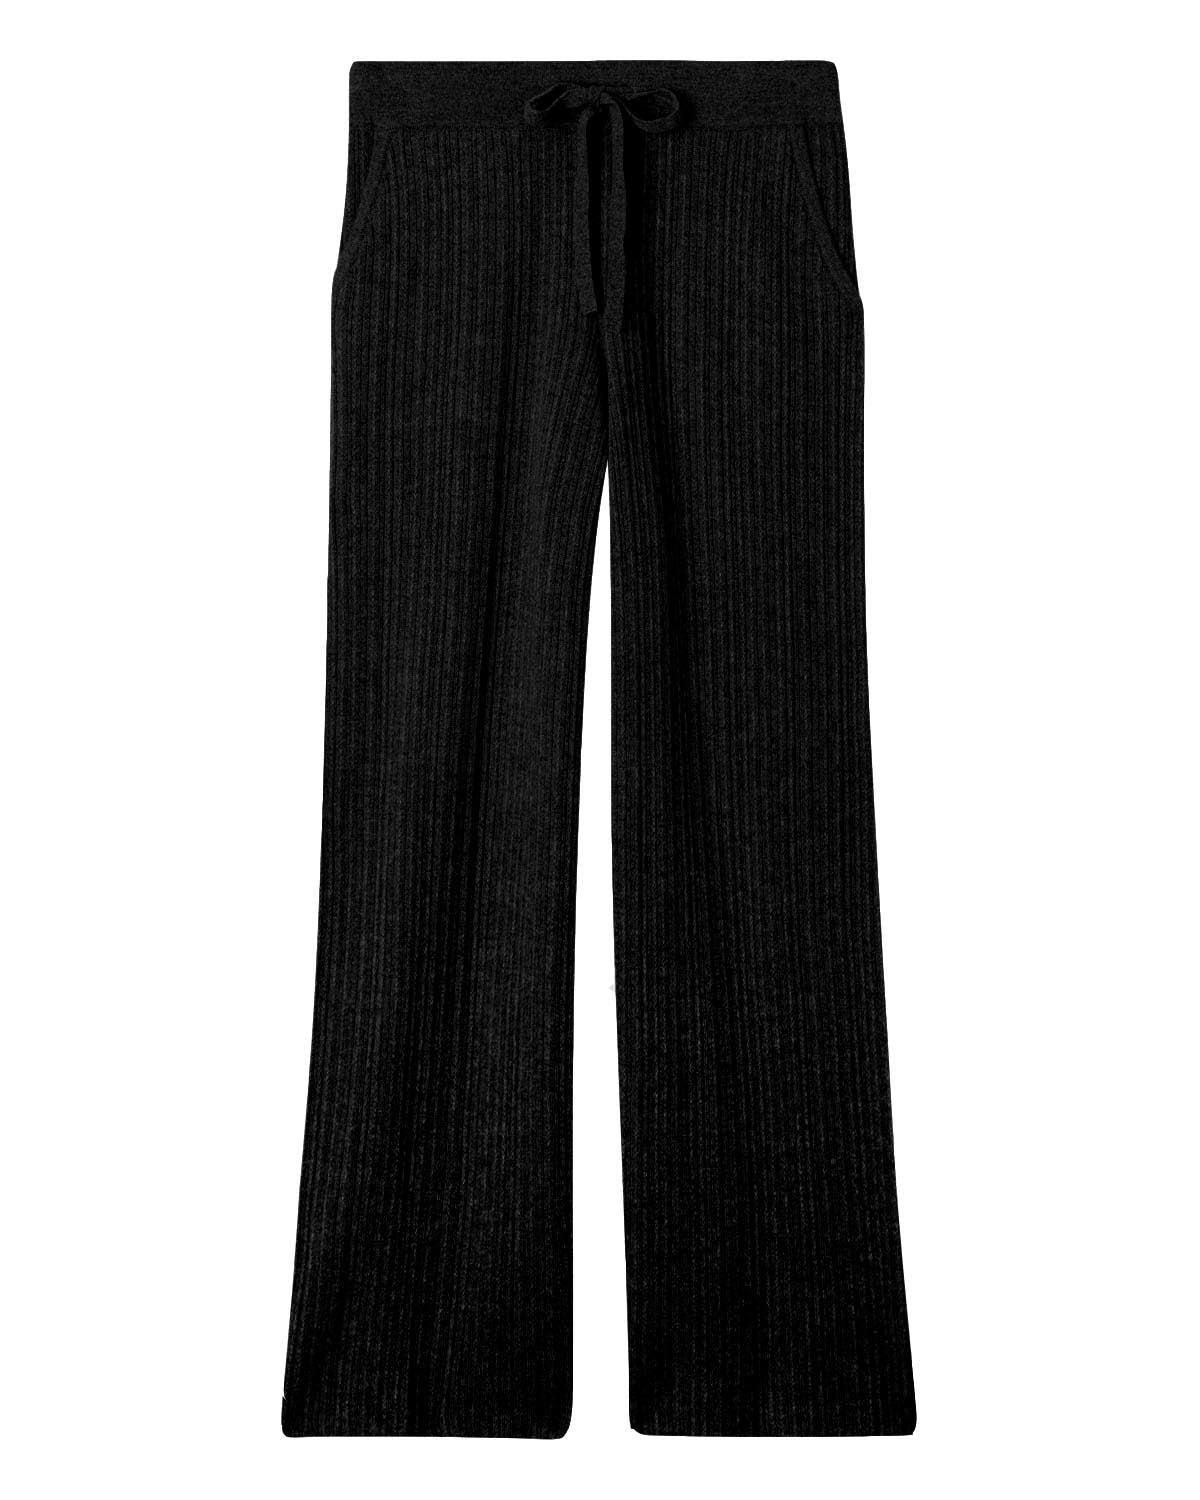 Cashmere Project Cashmere Ribbed Wide Leg Pant